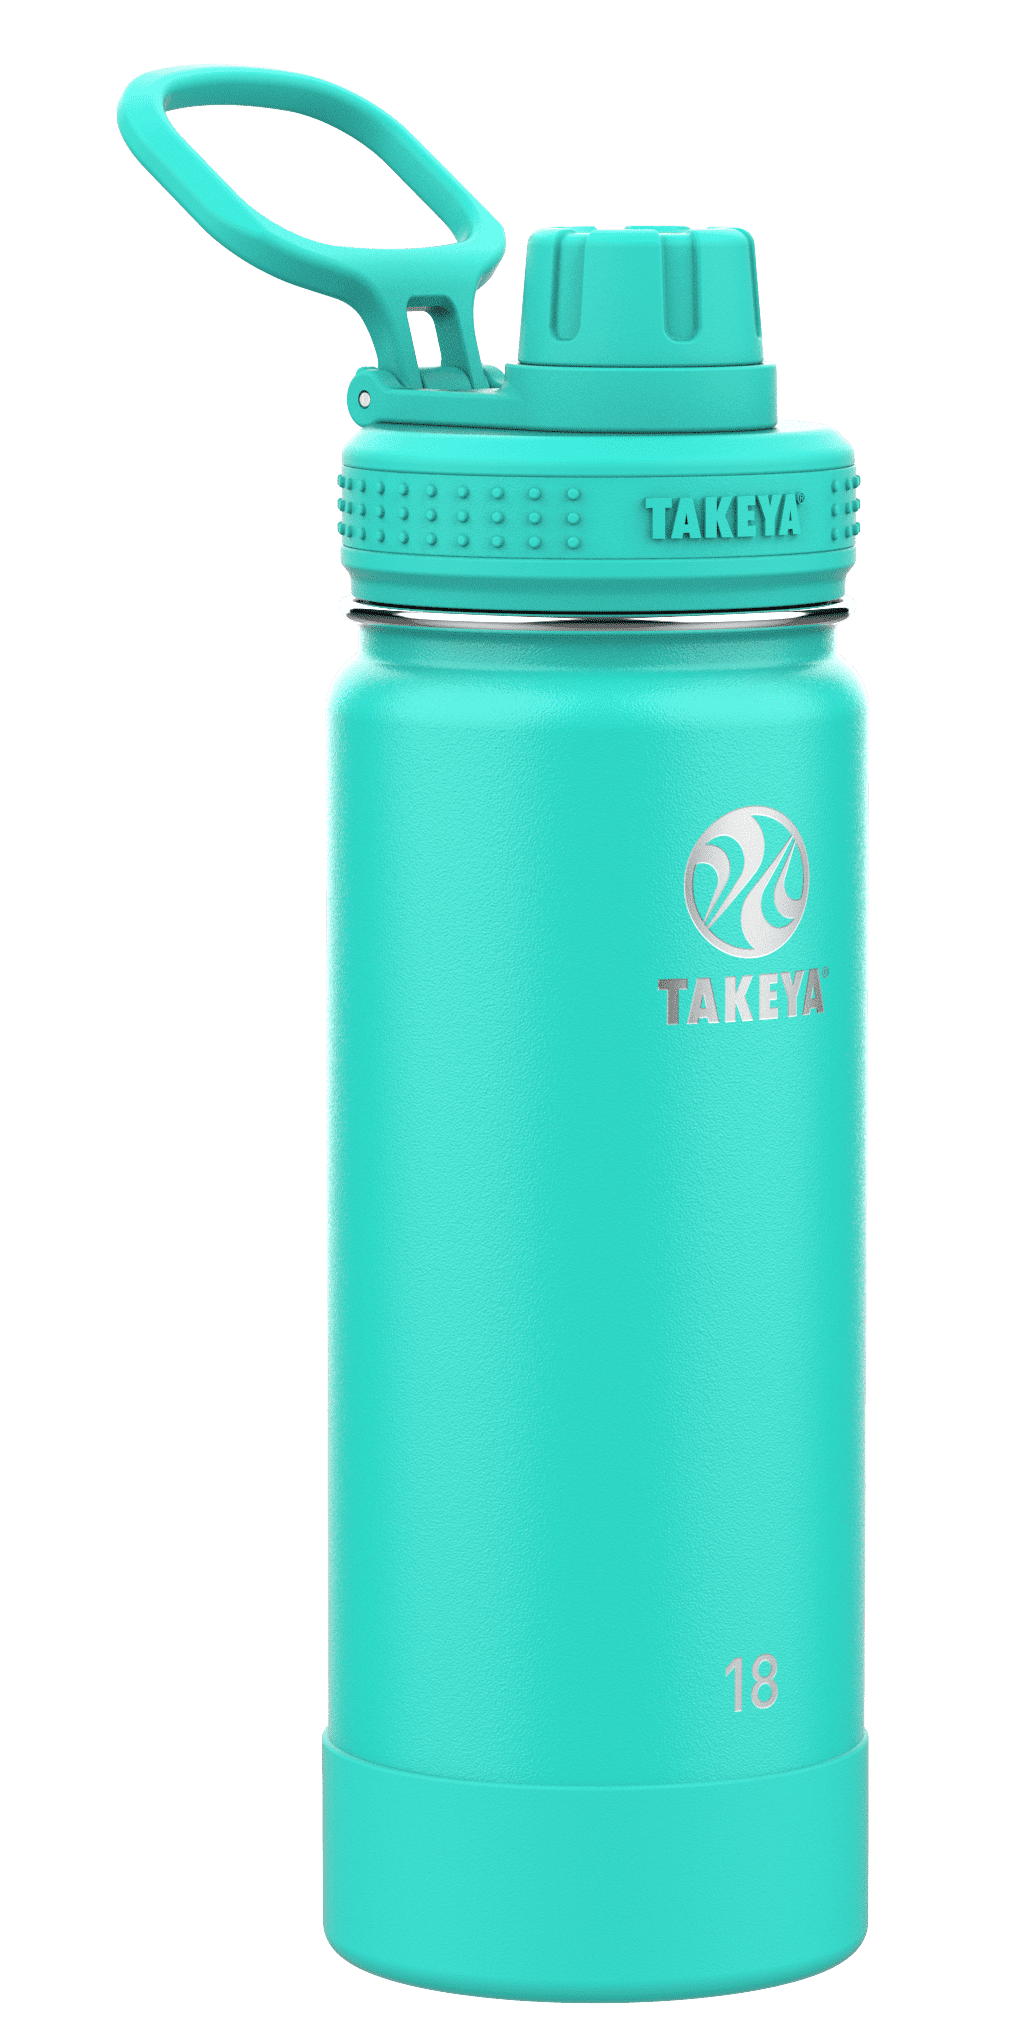 Takeya Actives Insulated Stainless Steel Spout Lid Water Bottle - Arctic, 24  oz - Kroger